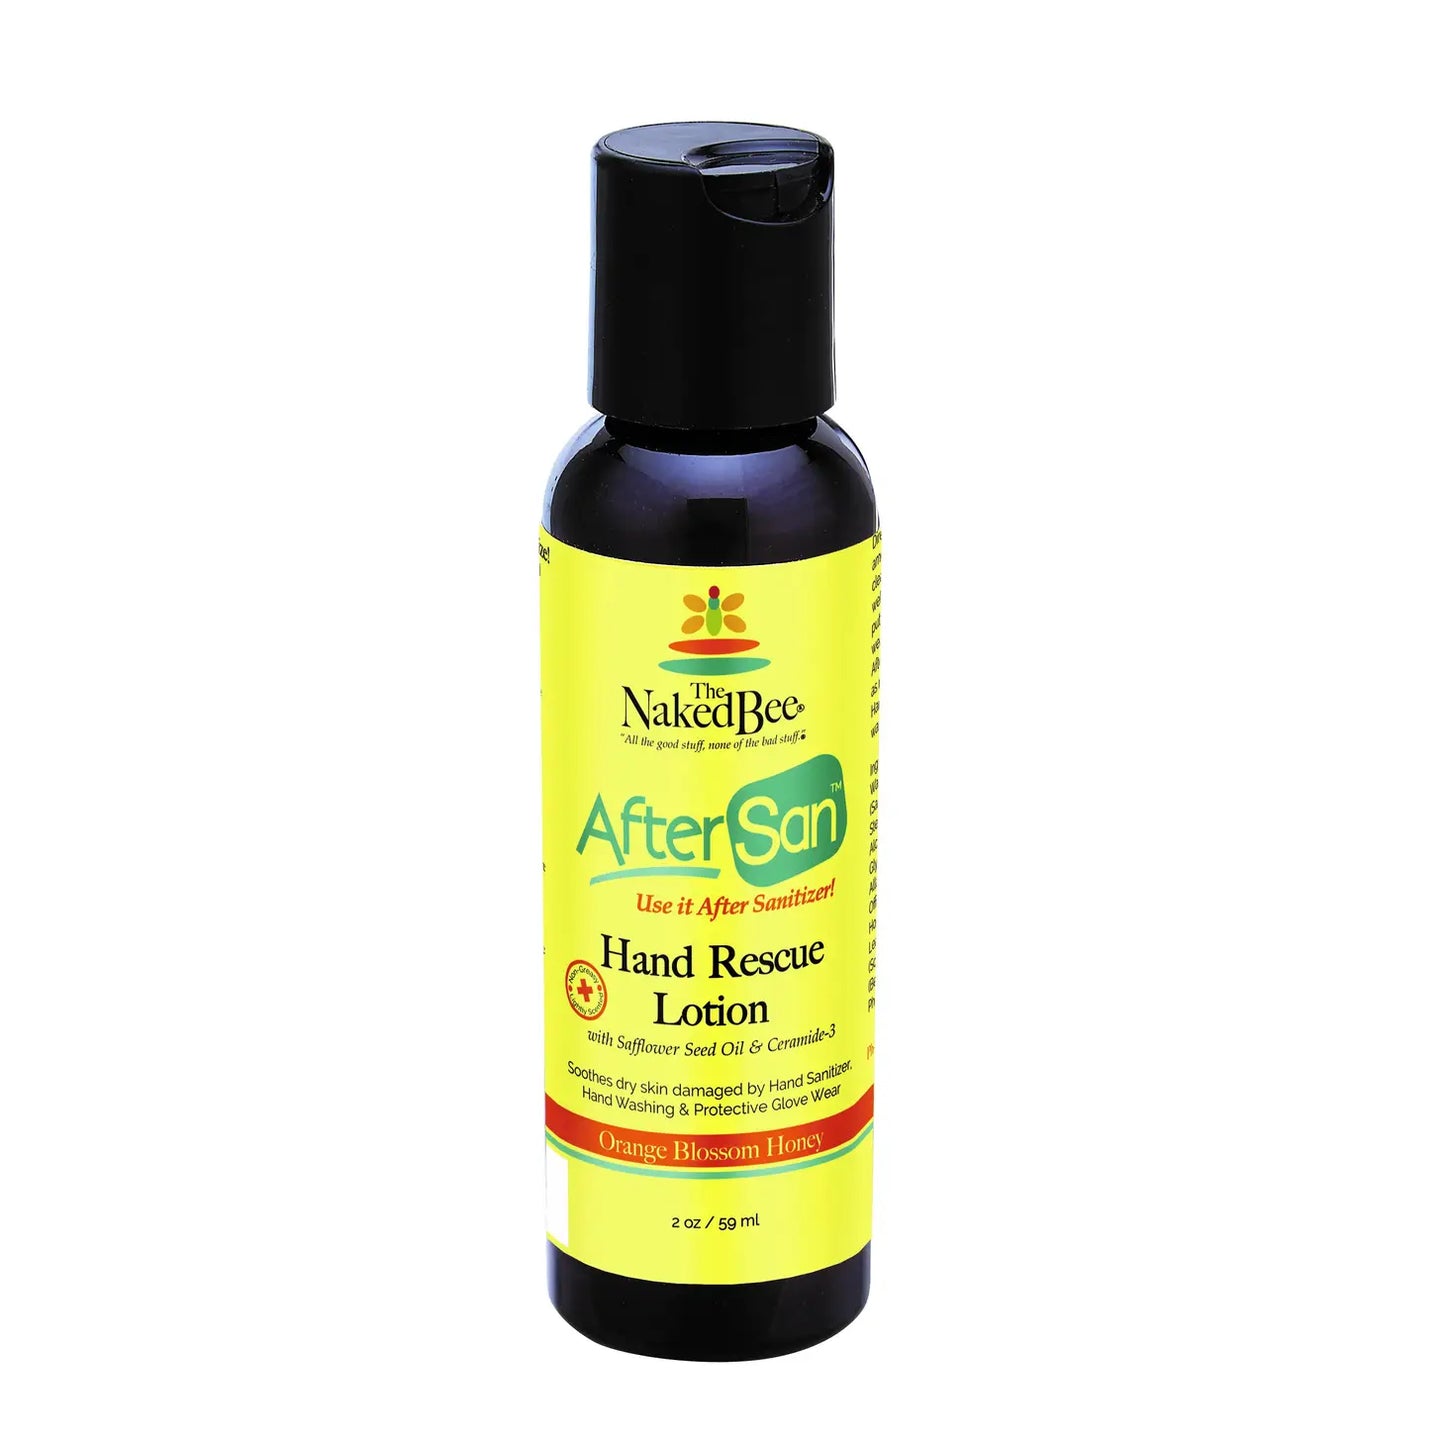 Naked Bee Hand Rescue Lotion